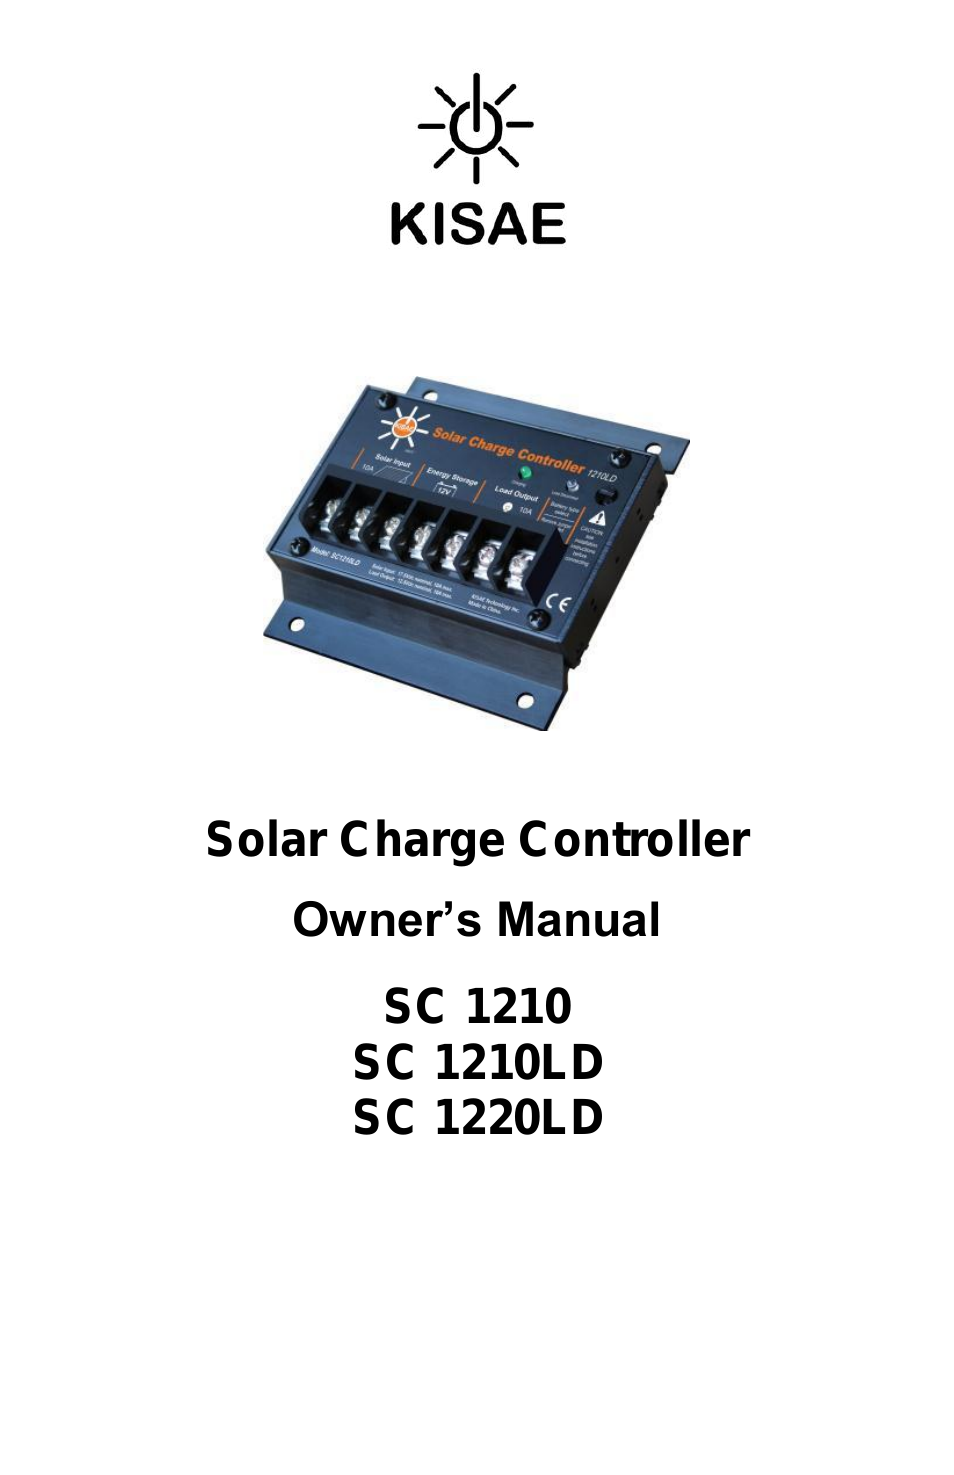 SC 1220LD Solar Charge Controller